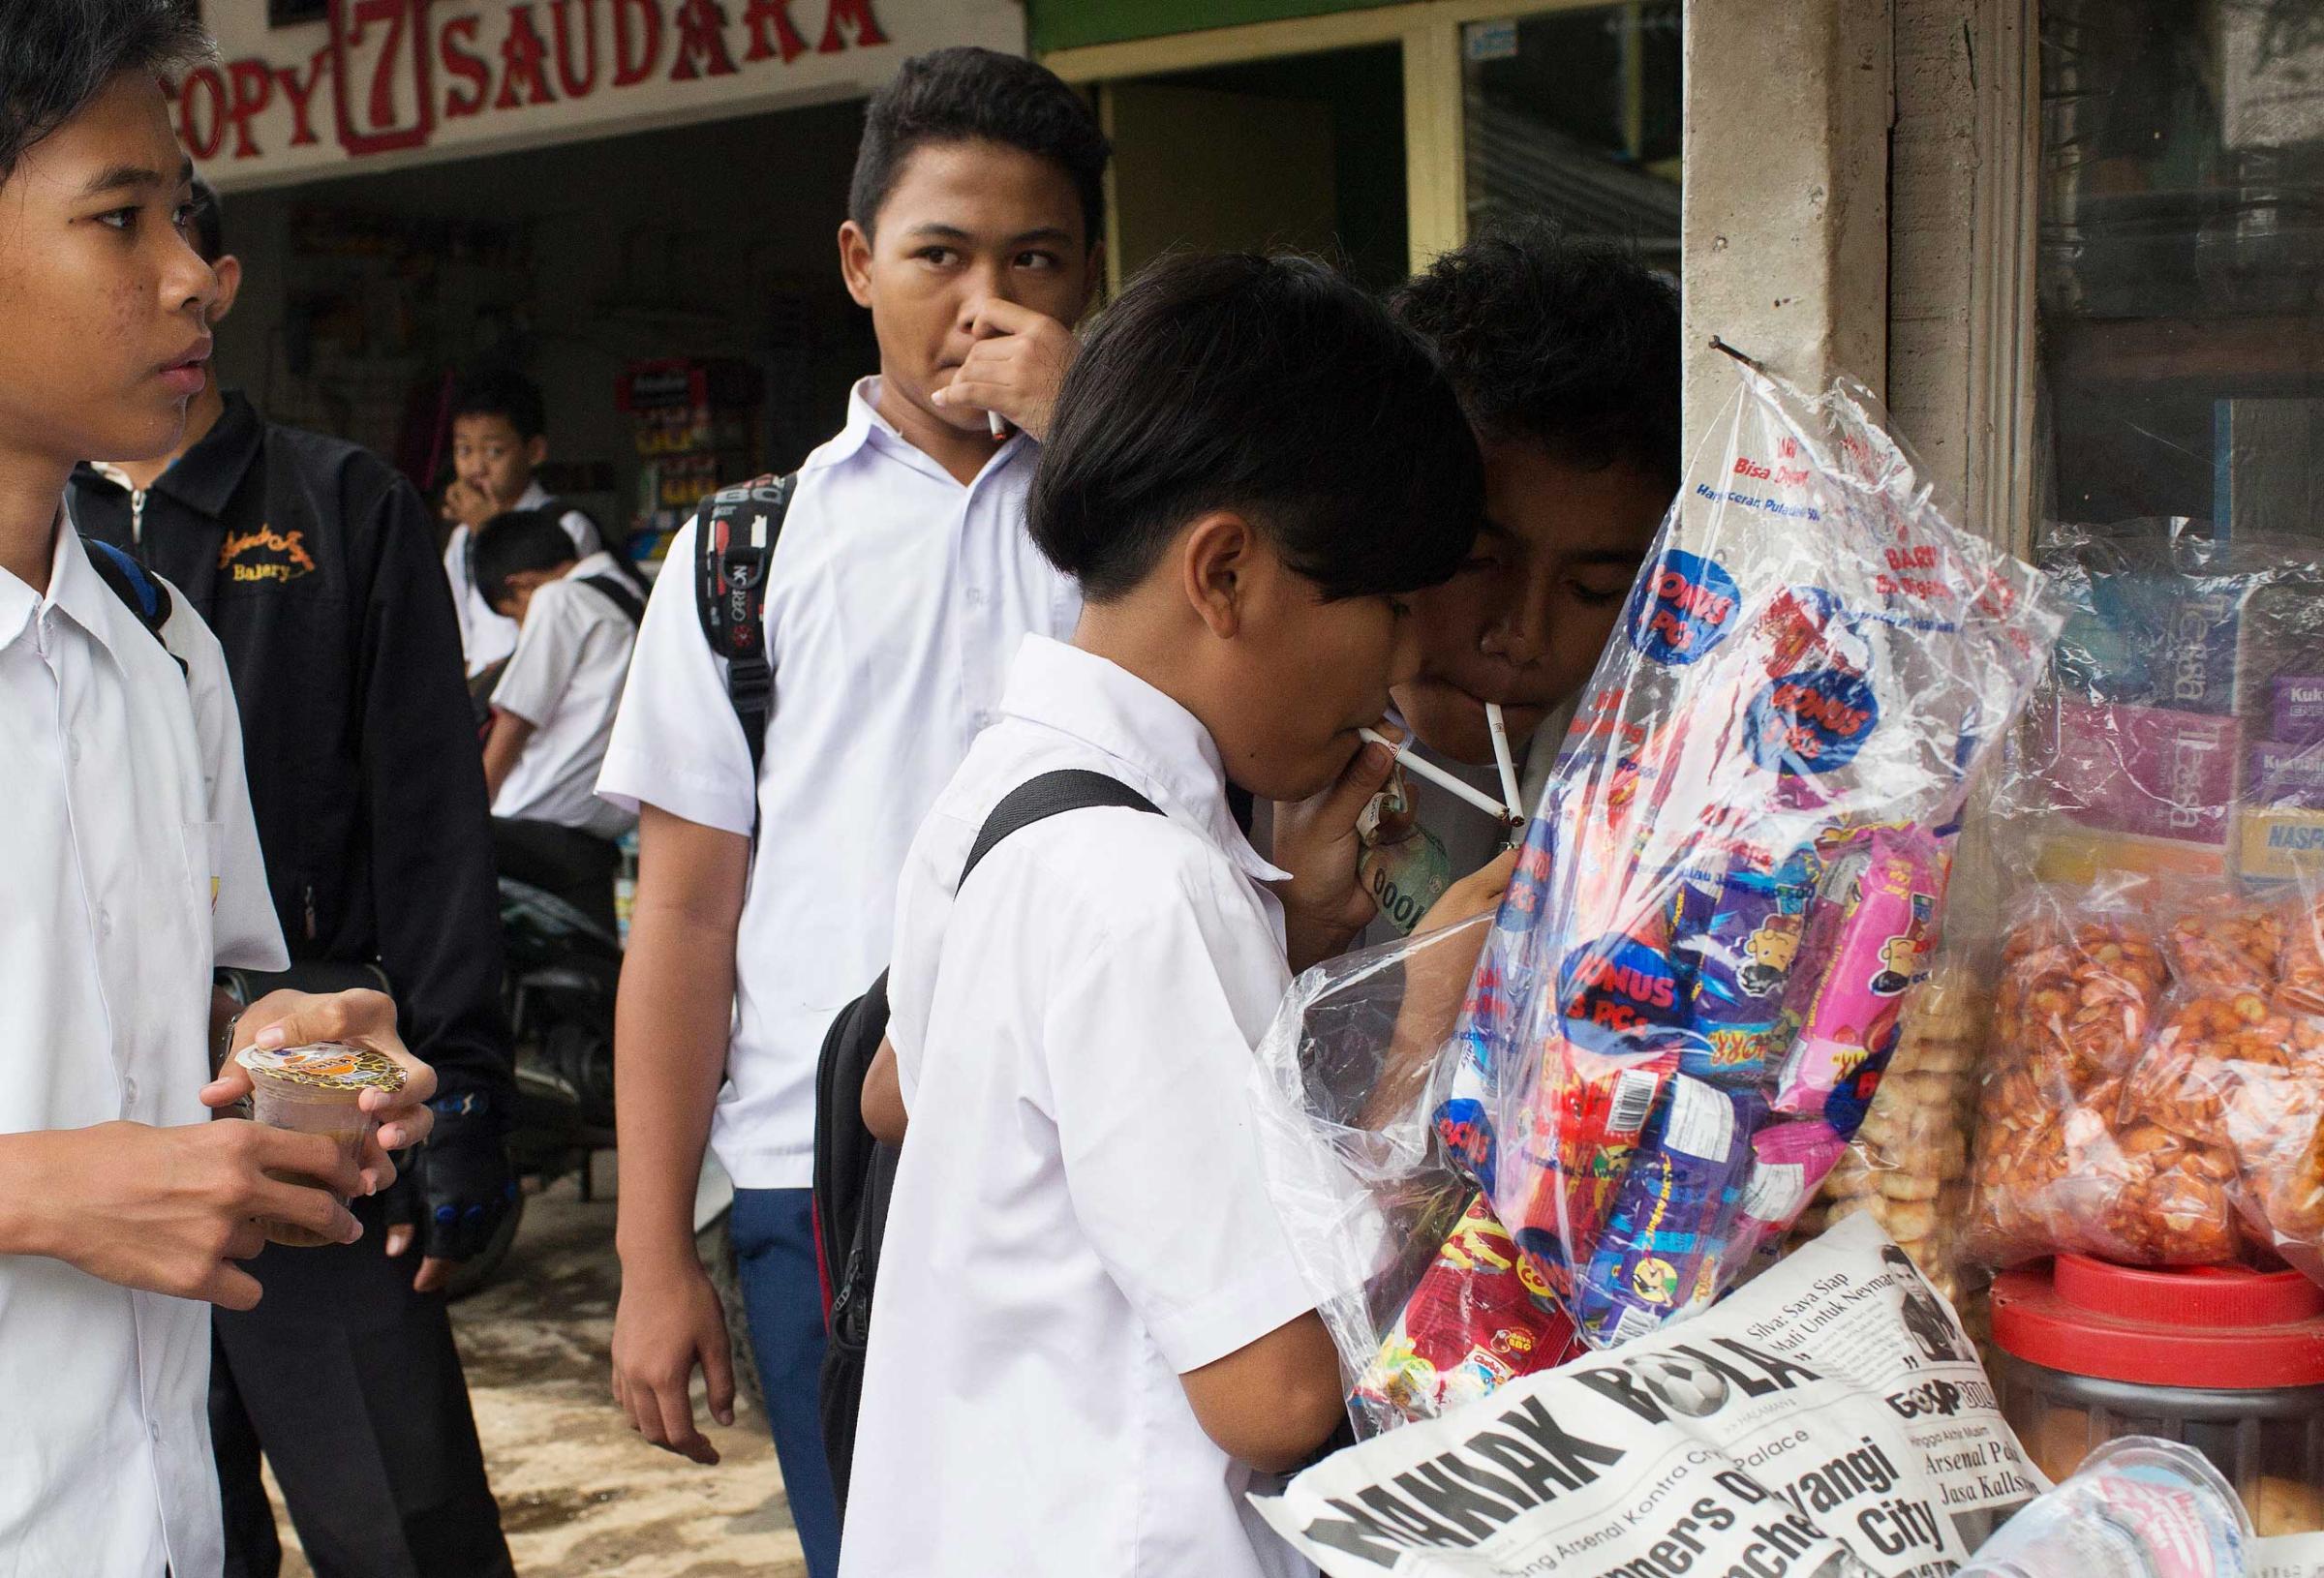 Groups of children buy single cigarettes and light them at a kiosk after school on February 12, 2014 in Jakarta, Indonesia. The children purchased cigarettes here without age identification and kiosks such as this one can be found near schools around the city.